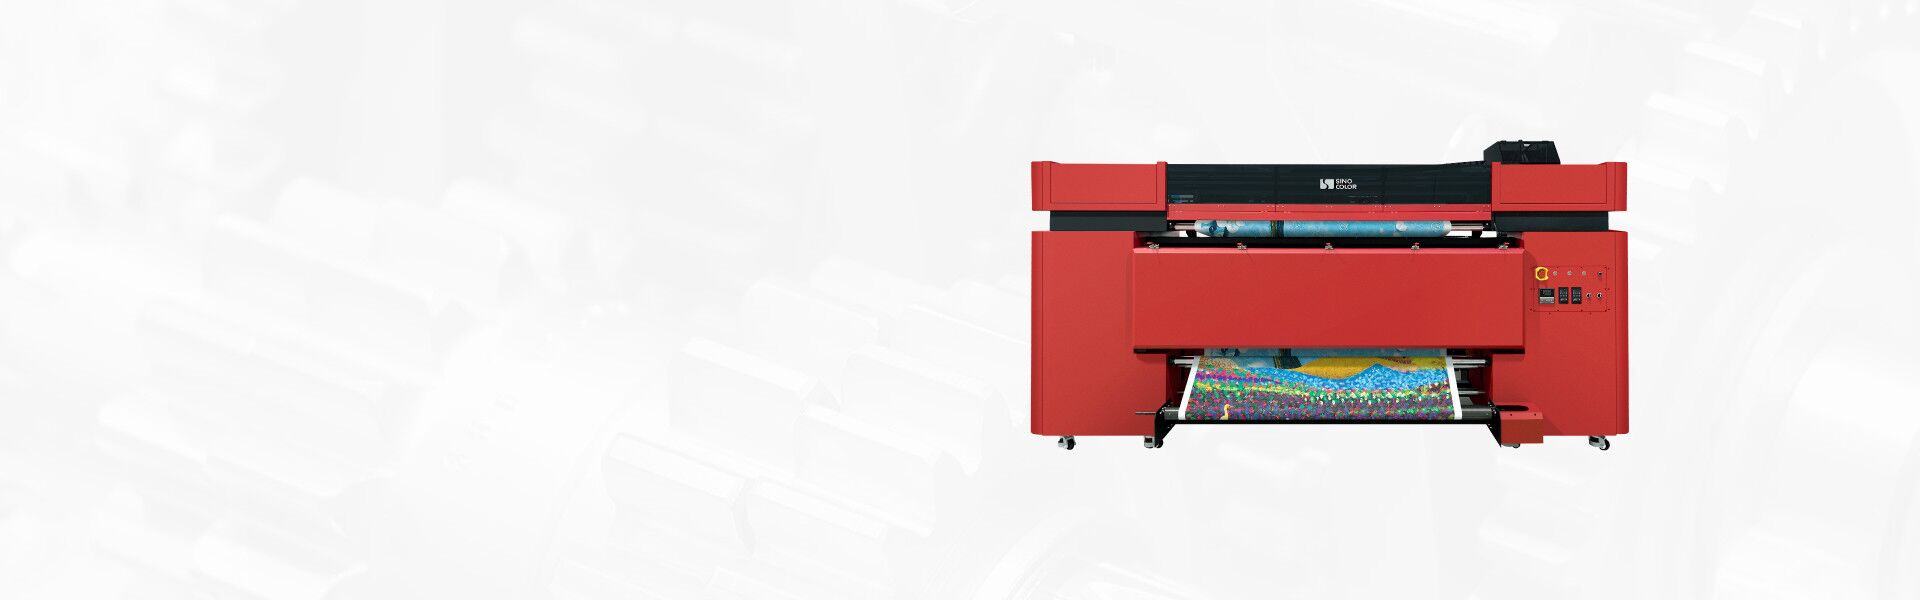 /products/textile-printer/direct-polyester-cotton-printer/direct-polyester-printer-fp-740s.html images